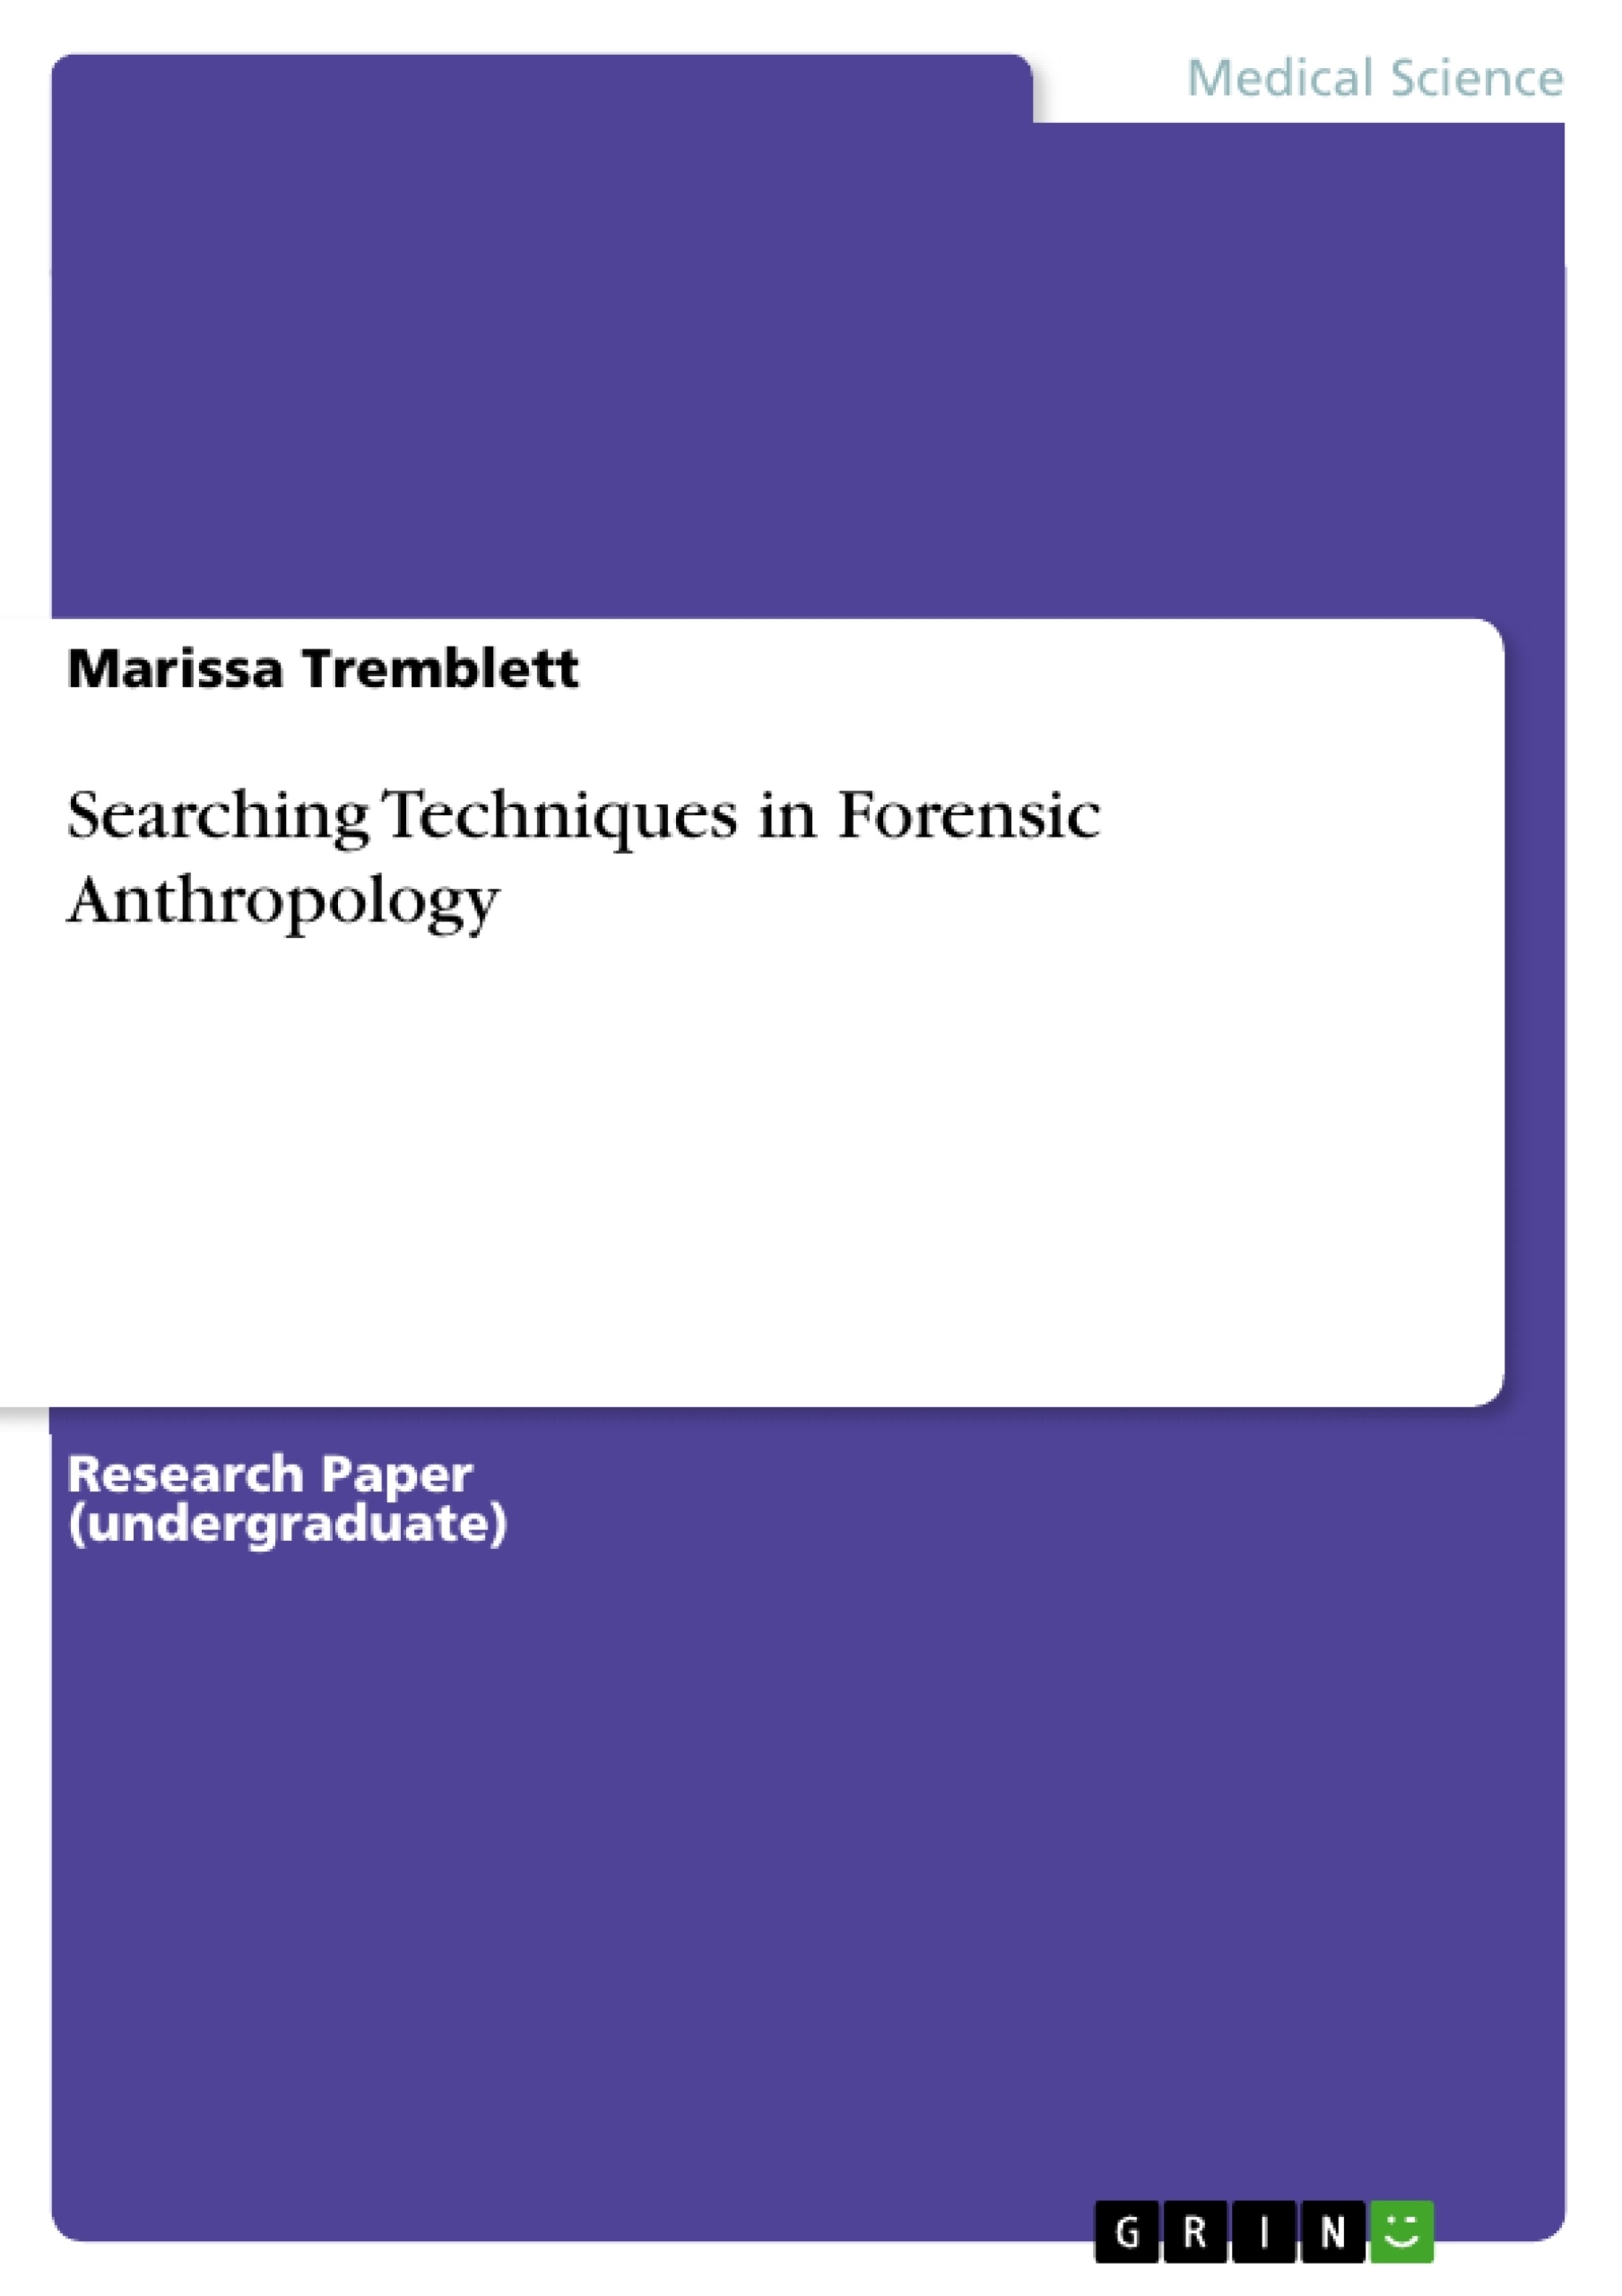 Titre: Searching Techniques in Forensic Anthropology